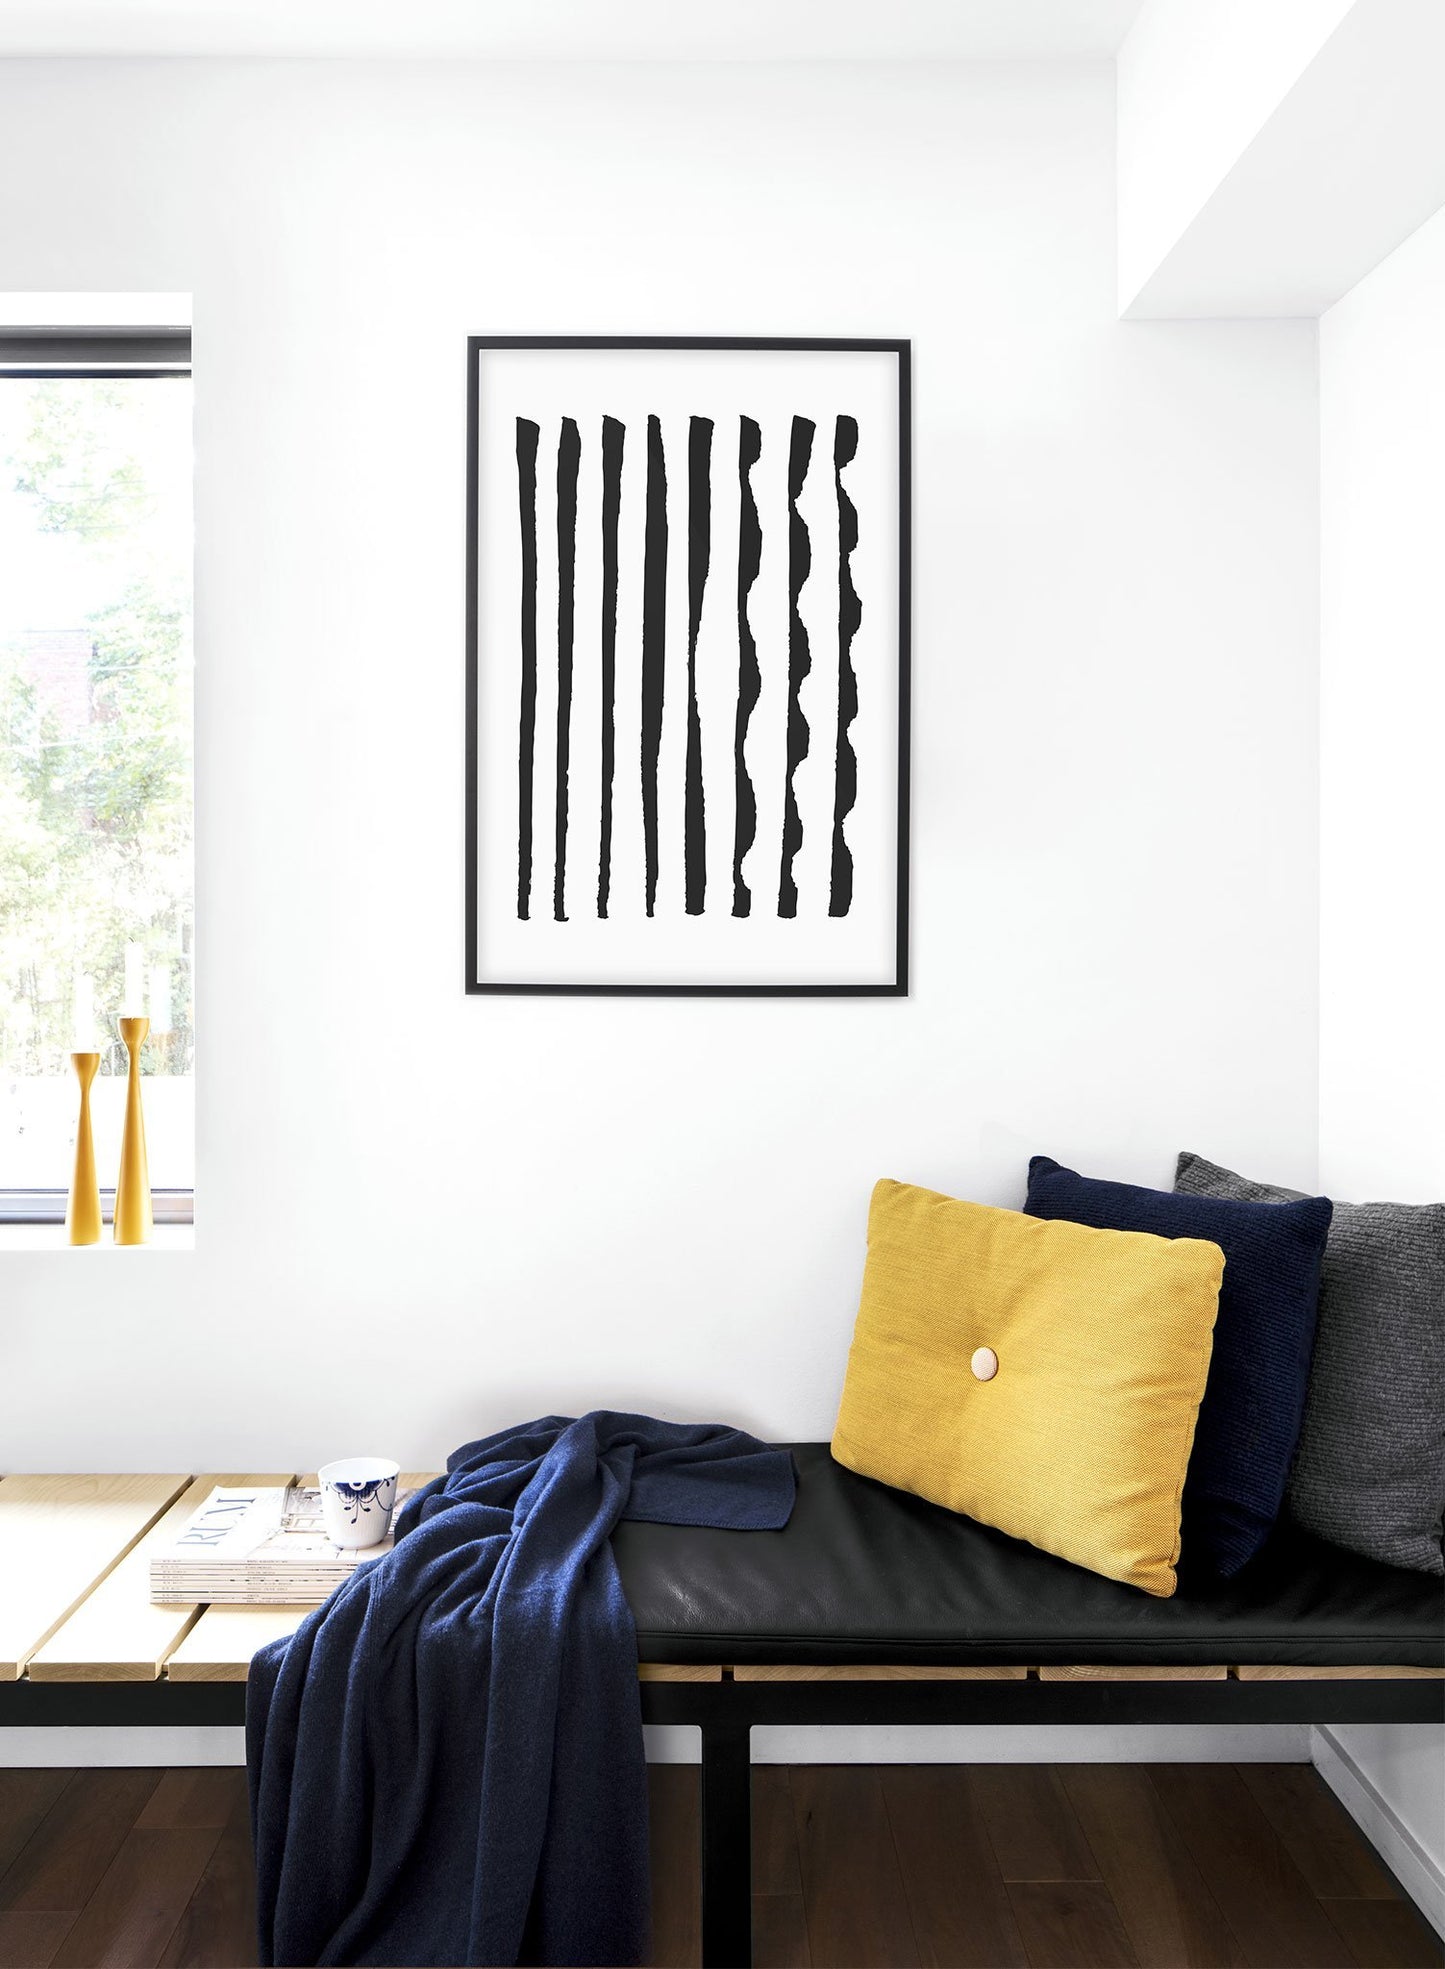 Modern minimalist poster by Opposite Wall with abstract design of Different Together by Toffie Affichiste - Bedroom